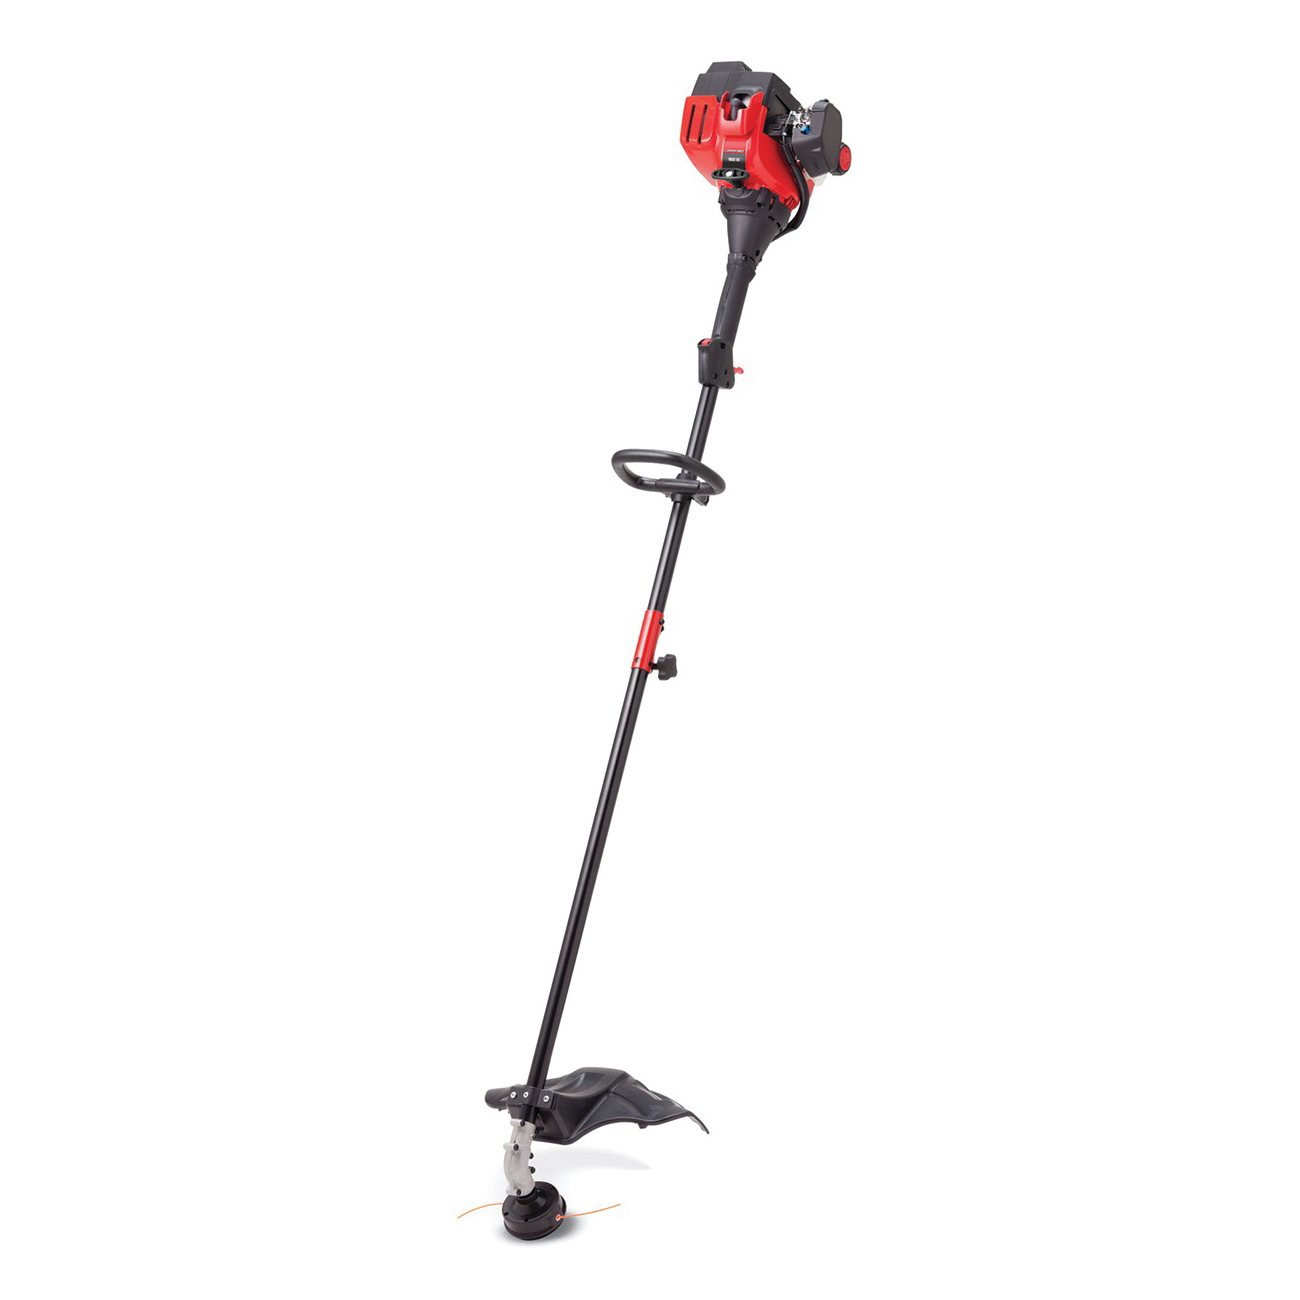 41CDZ32C766 String Trimmer, Gasoline, 25 cc Engine Displacement, 2-Cycle Engine, 0.095 in Dia Line